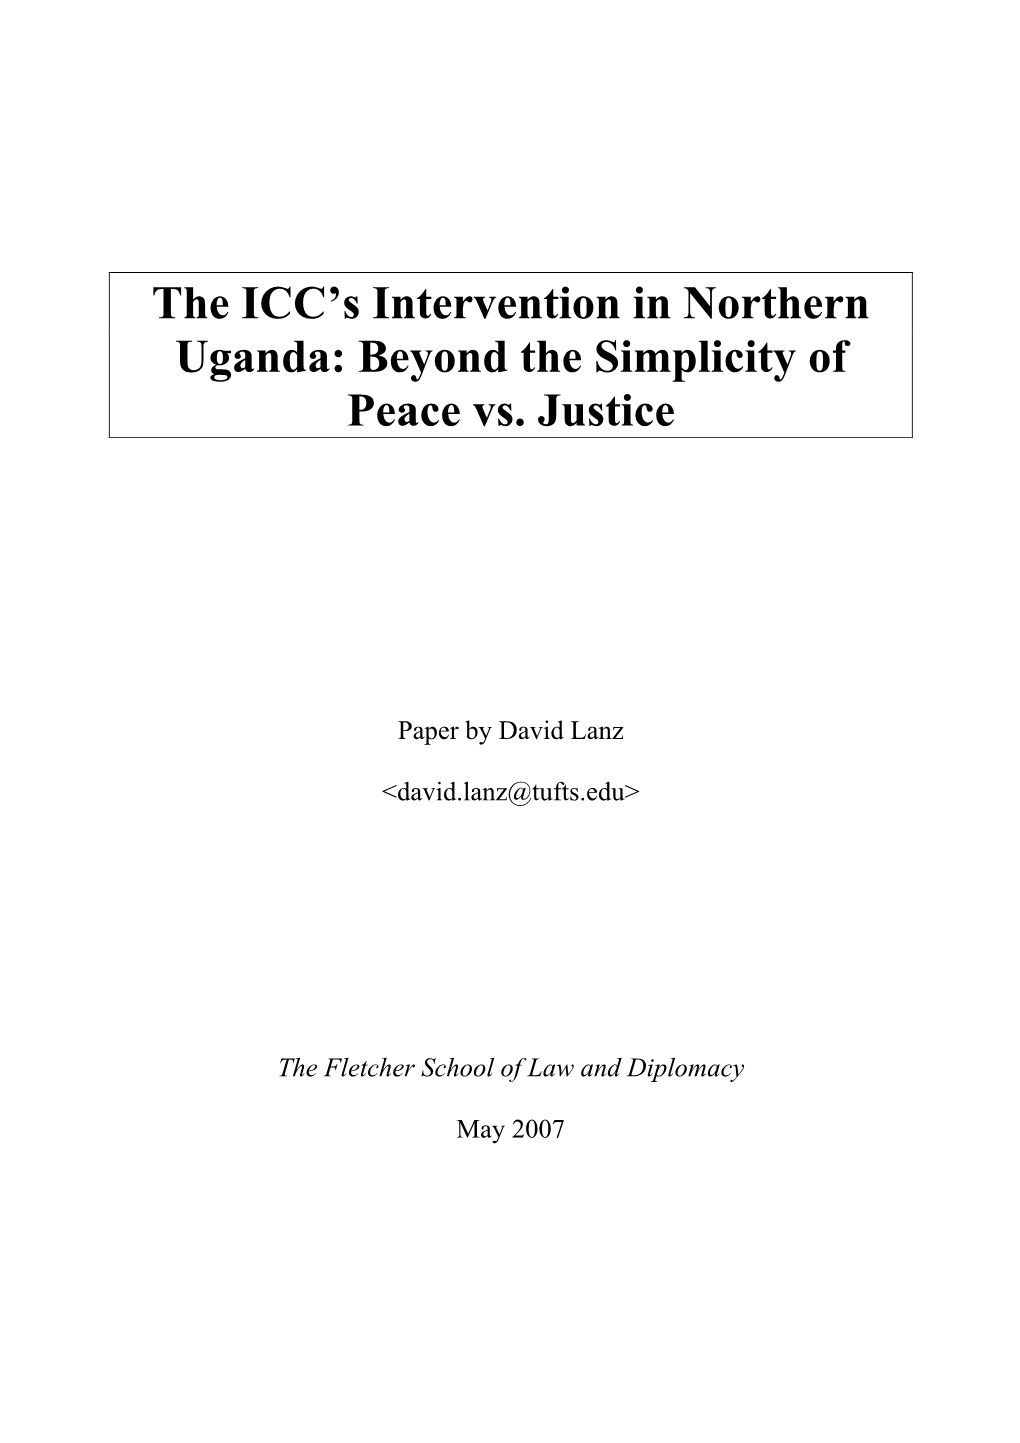 The ICC's Intervention in Northern Uganda